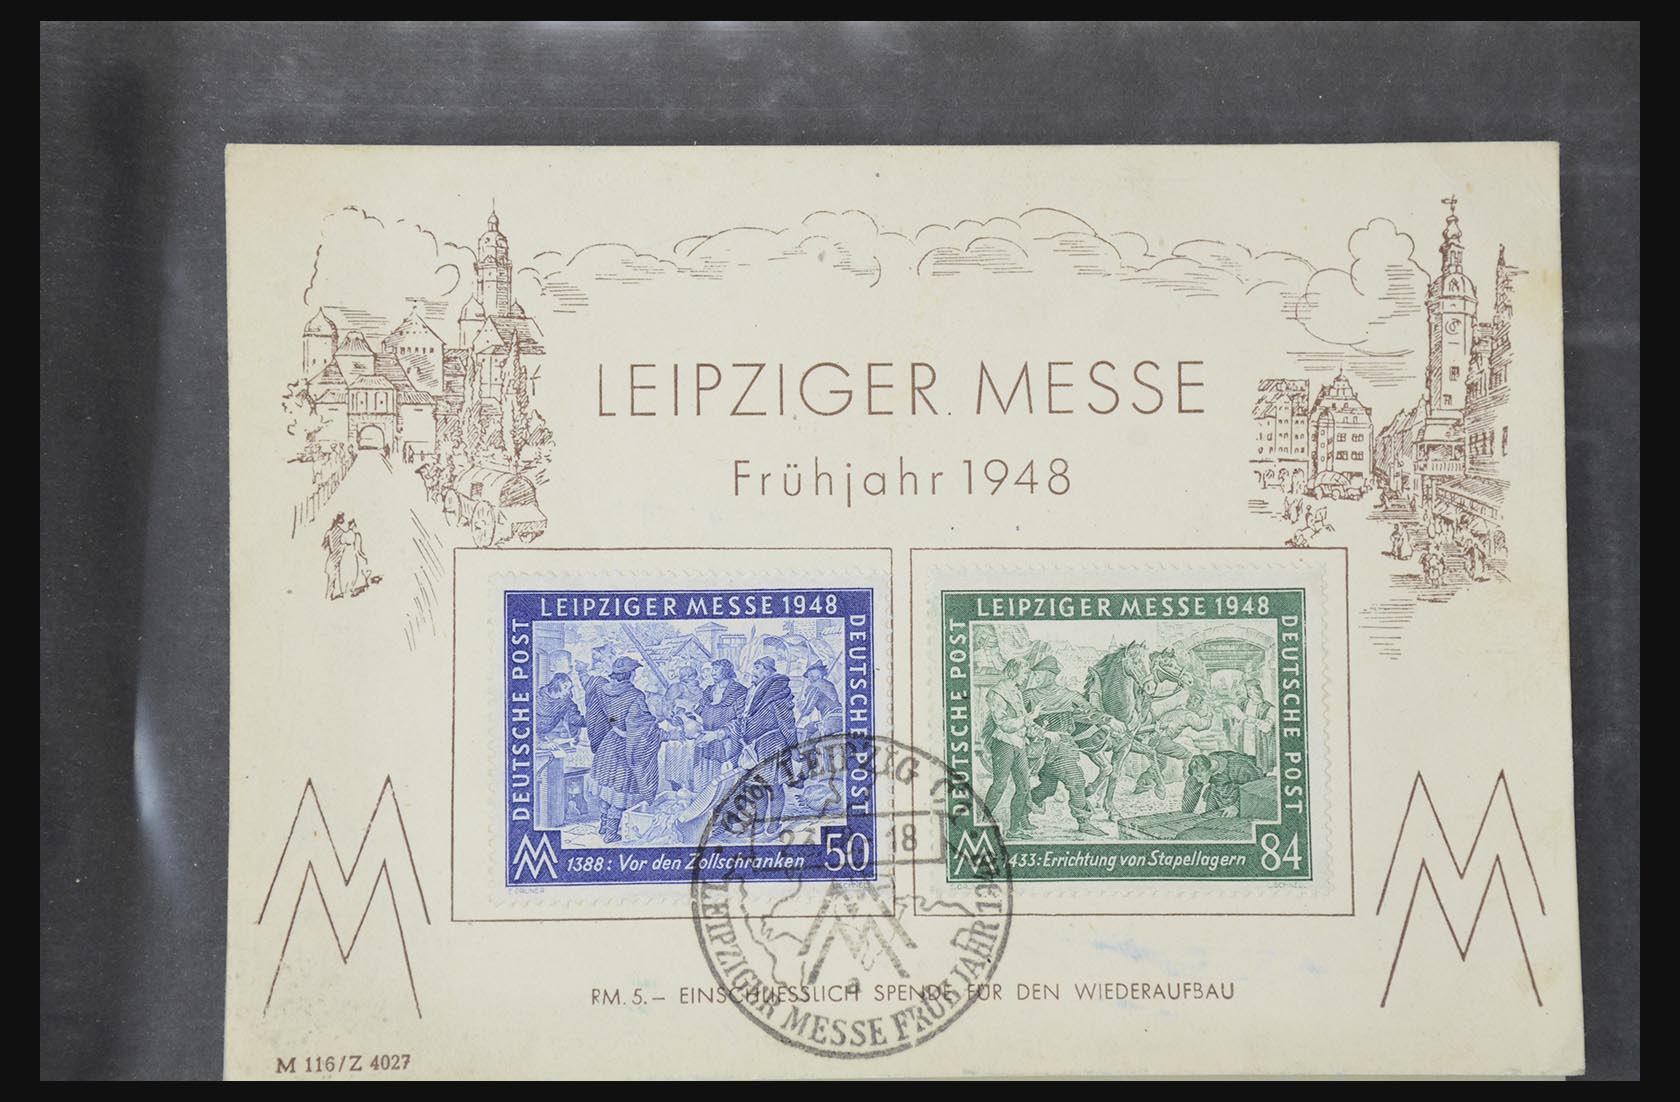 31581 003 - 31581 Germany covers and FDC's 1945-1981.